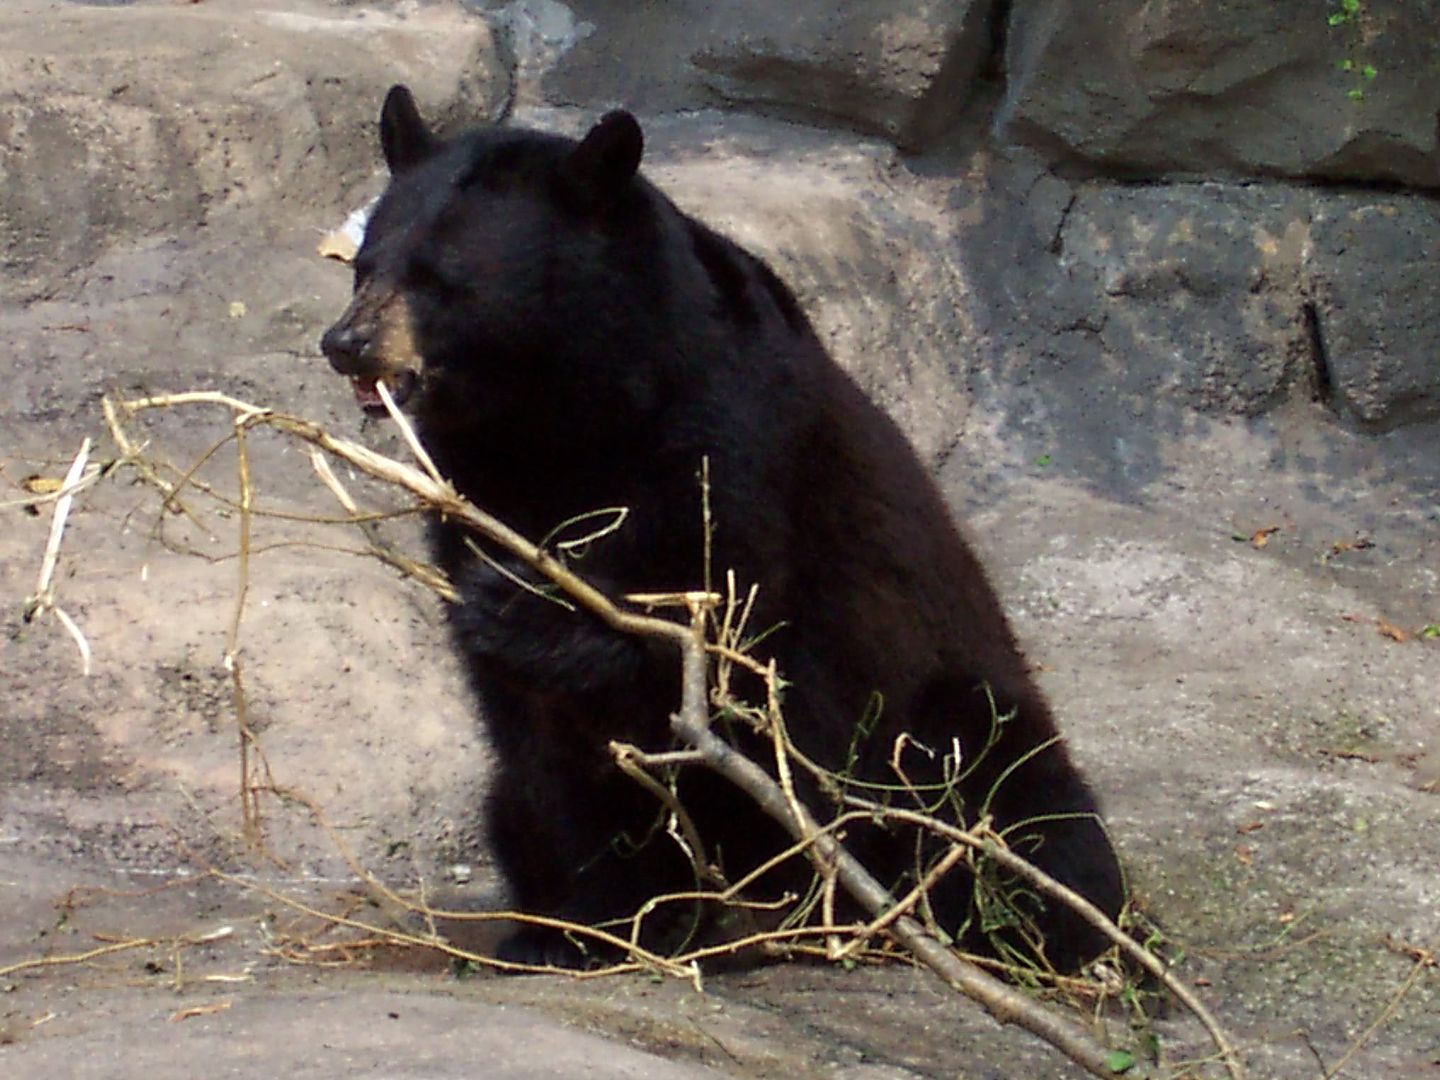 A black bear chewing on a branch Pictures, Images and Photos